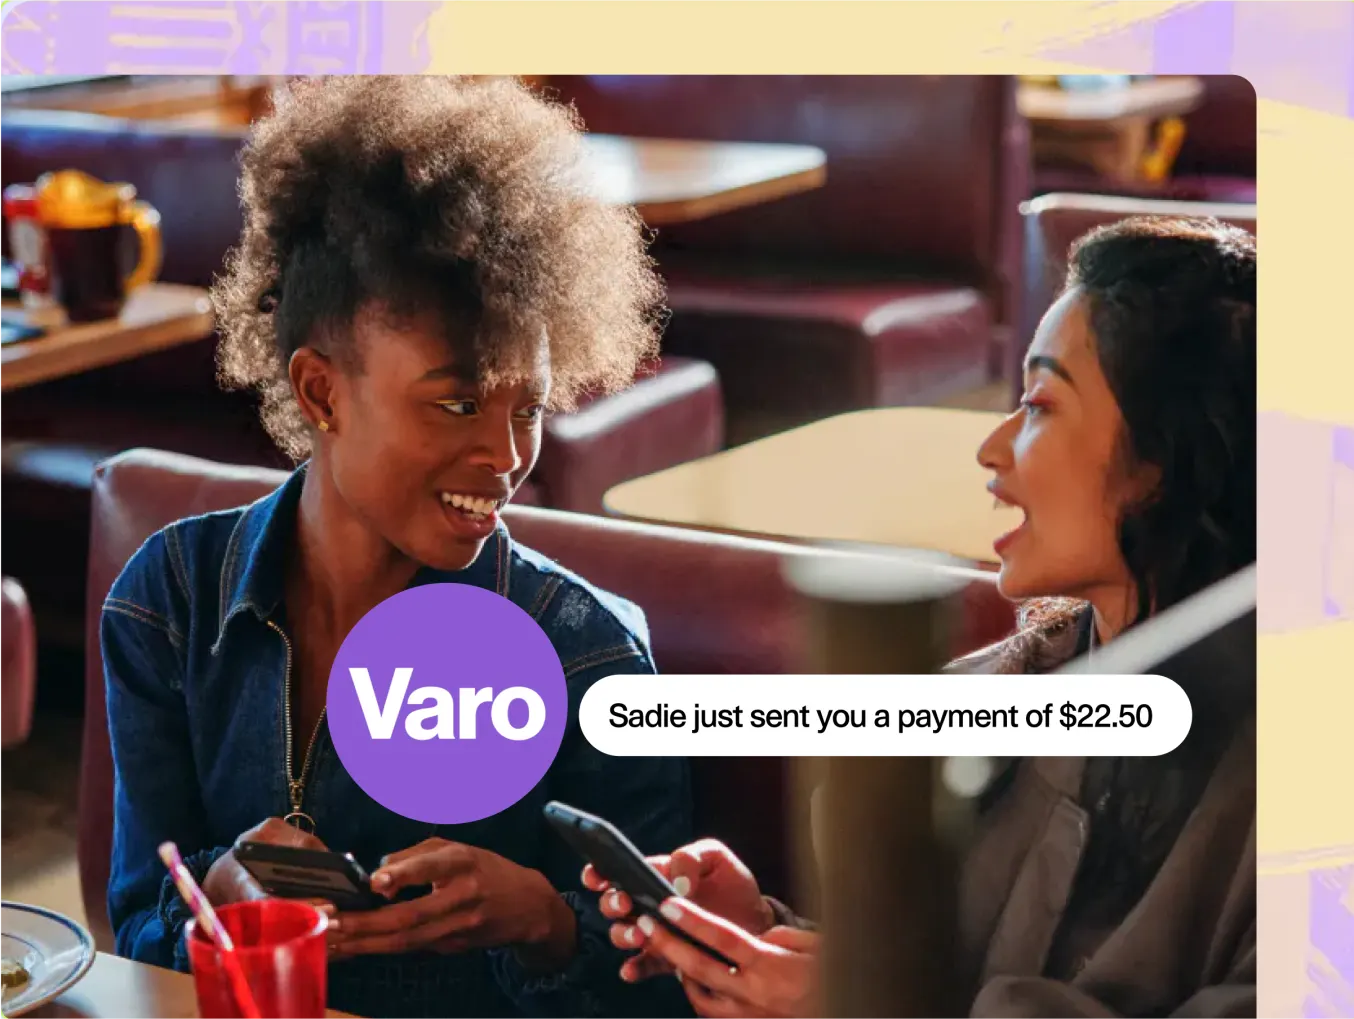 Varo advertisement featuring two women sitting in a café, smiling and looking at their smartphones. A notification bubble reads, 'Sadie just sent you a payment of $22.50.' The Varo logo is prominently displayed in a purple circle. The background includes a cozy café setting with tables and booths.